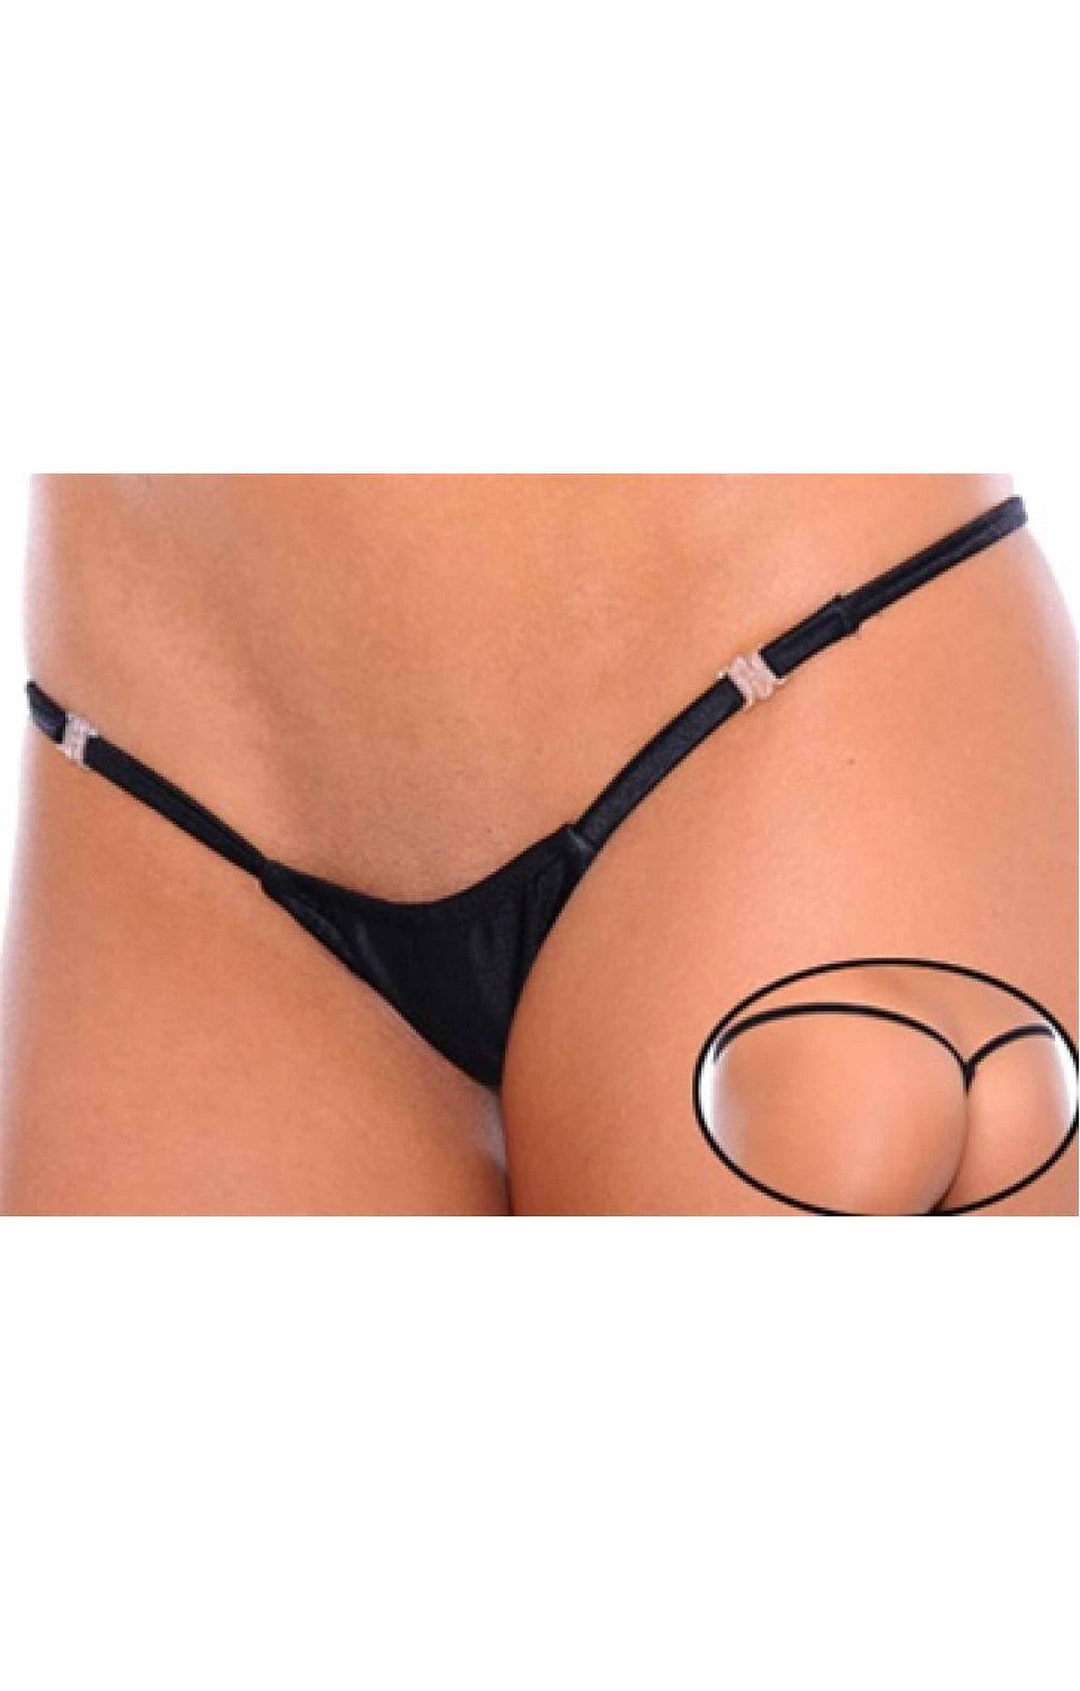 Low Rise Cotton Micro Thong G-string Panty, Sexy Thong Multiple